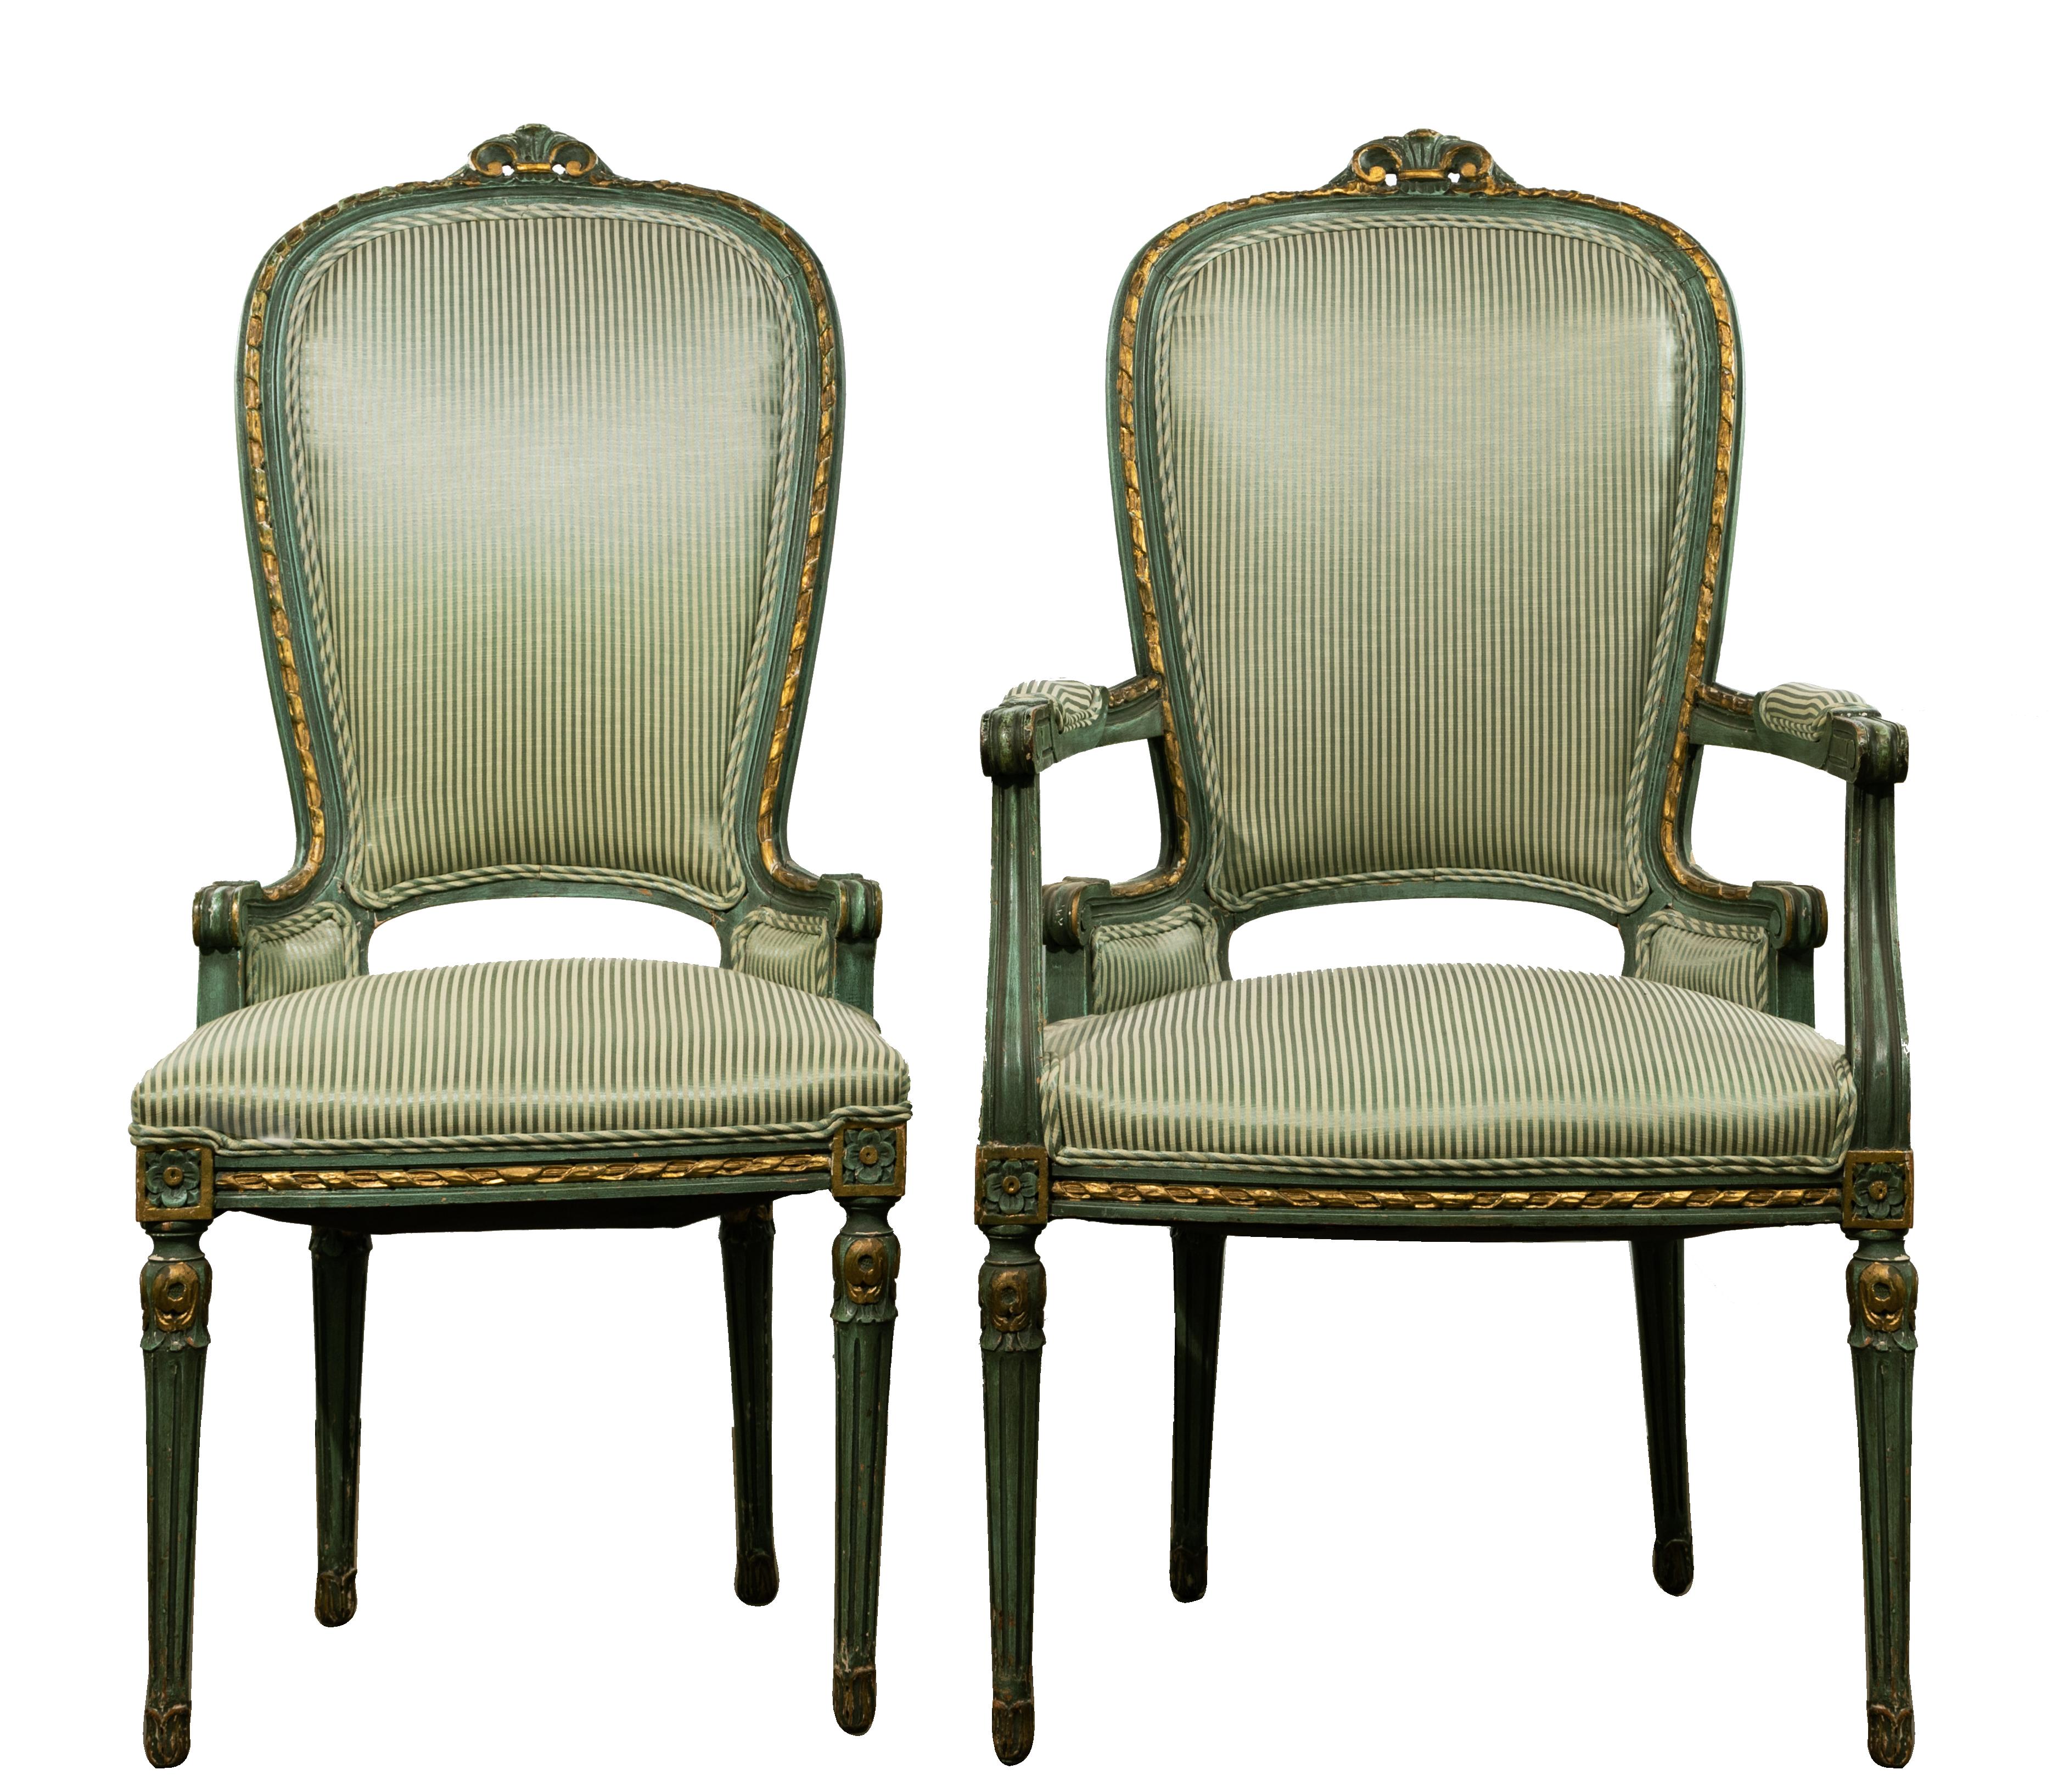 Neoclassical Style Upholstered Dining Chair Collection